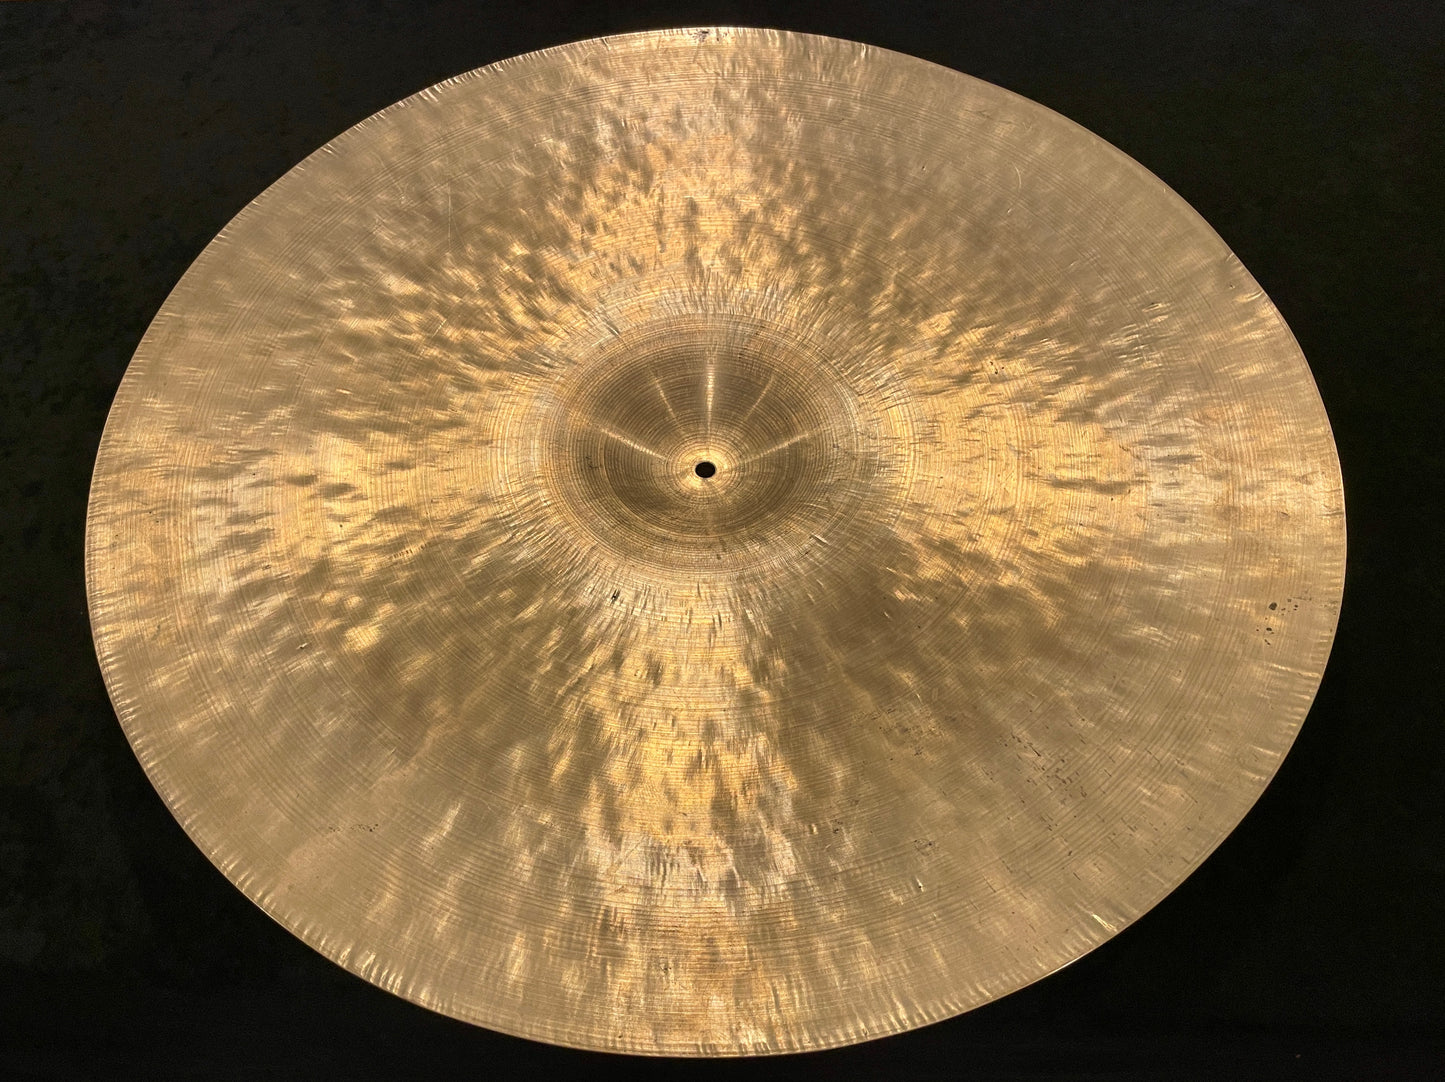 24" Pre-UFIP Hand Hammered Ride Cymbal Made in Italy 3112g *Video Demo*